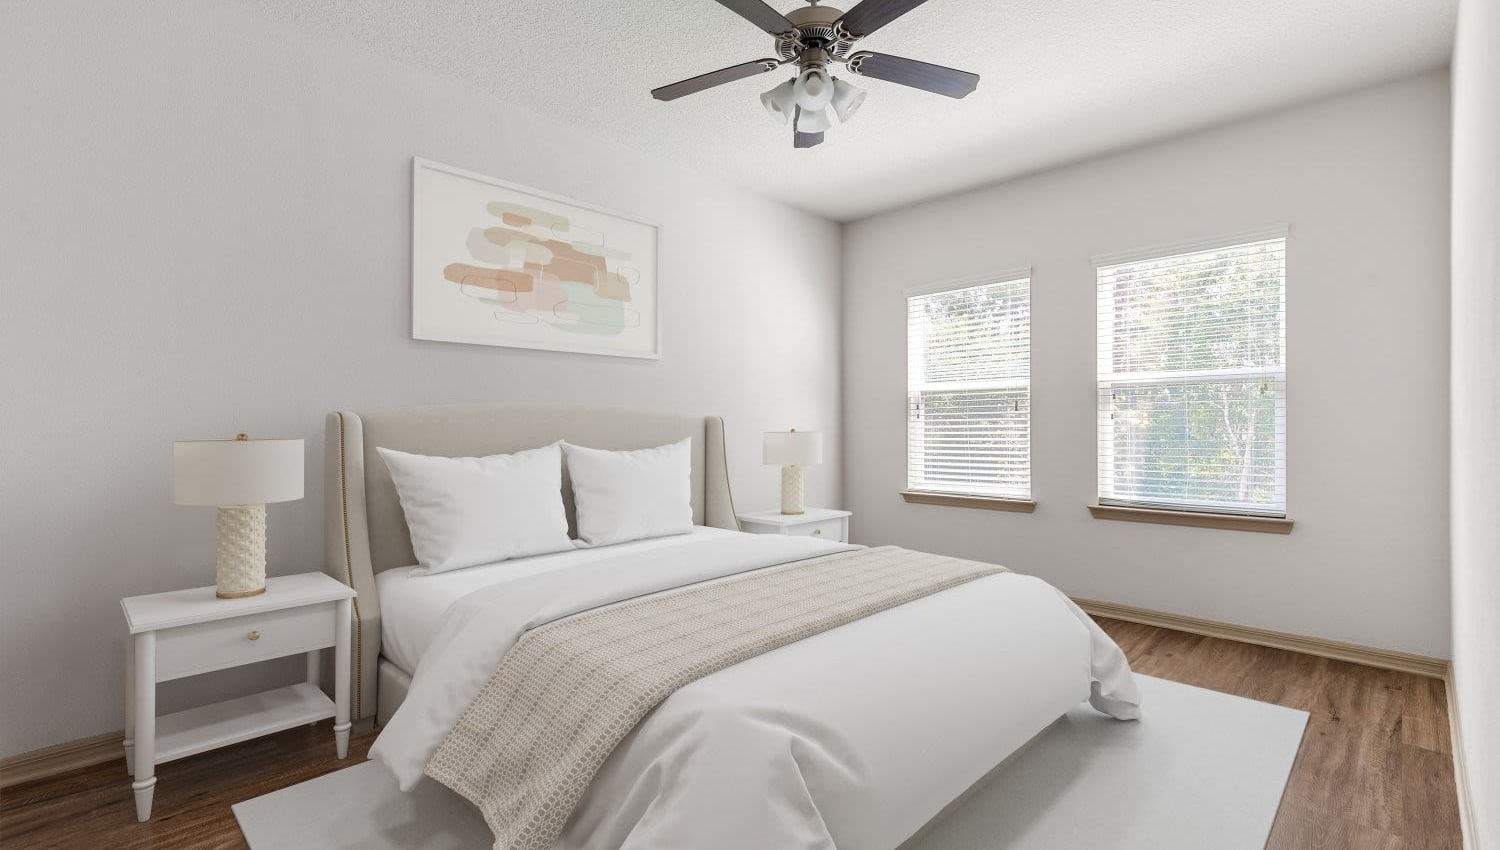 Bedroom with ceiling fan and wooden floor at Lakeline at Bartram Park in Jacksonville, Florida